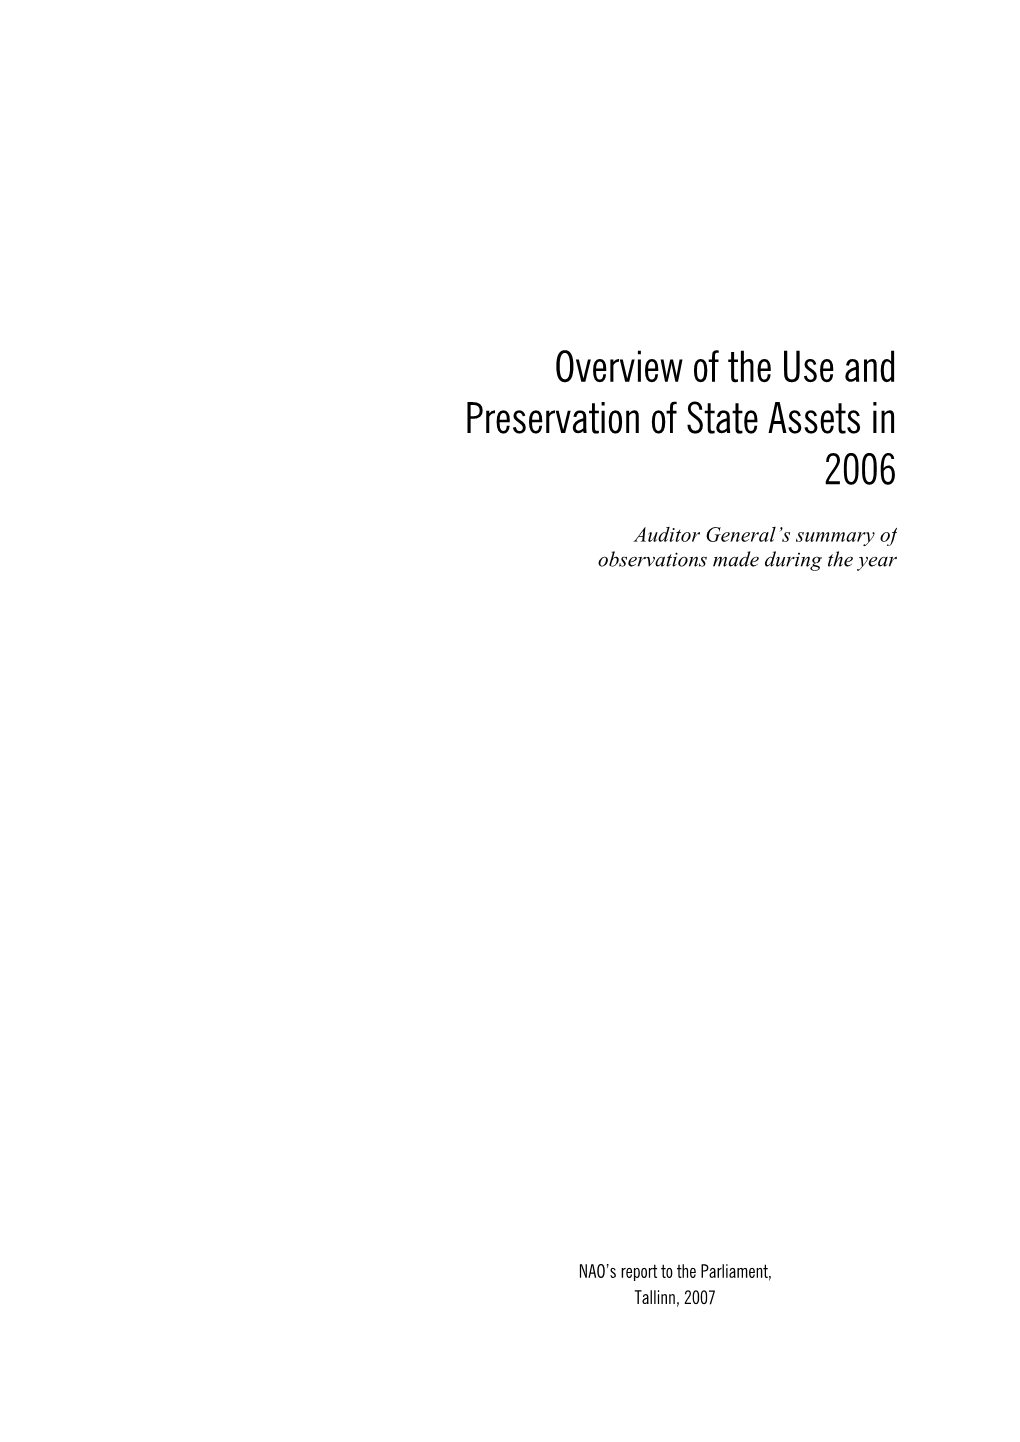 Overview of the Use and Preservation of State Assets in 2006